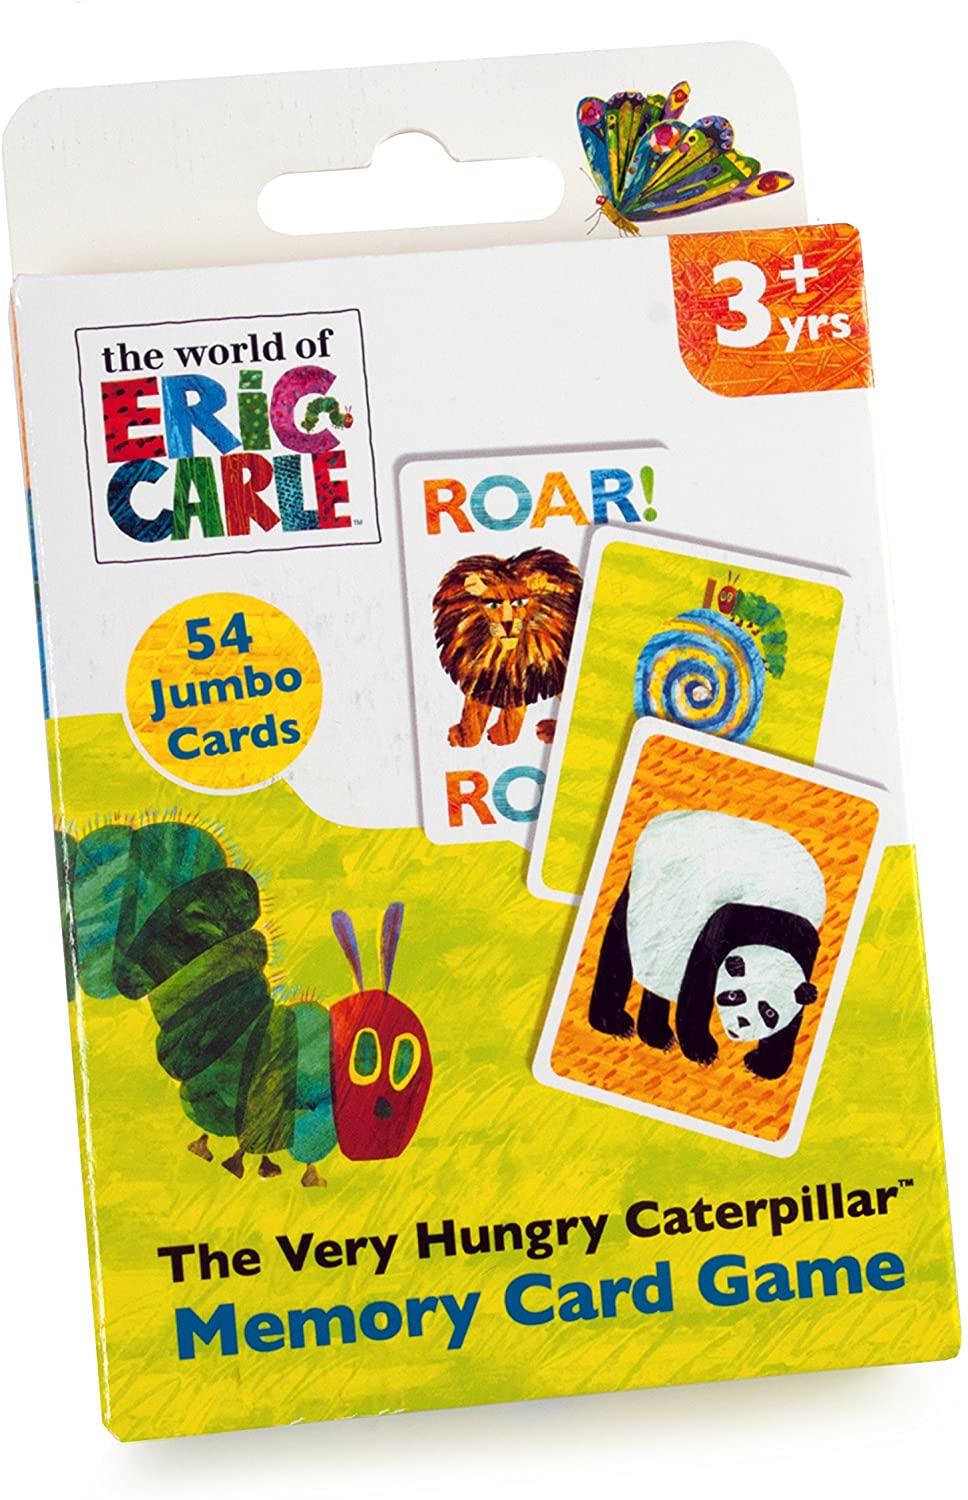 Rectangular lime green and white box featurung an image of a green Very Hungry Caterpillar and image of 3 individual cards. The wording at the foot reads" Very Hungry Caterpillar Memory Card Game".